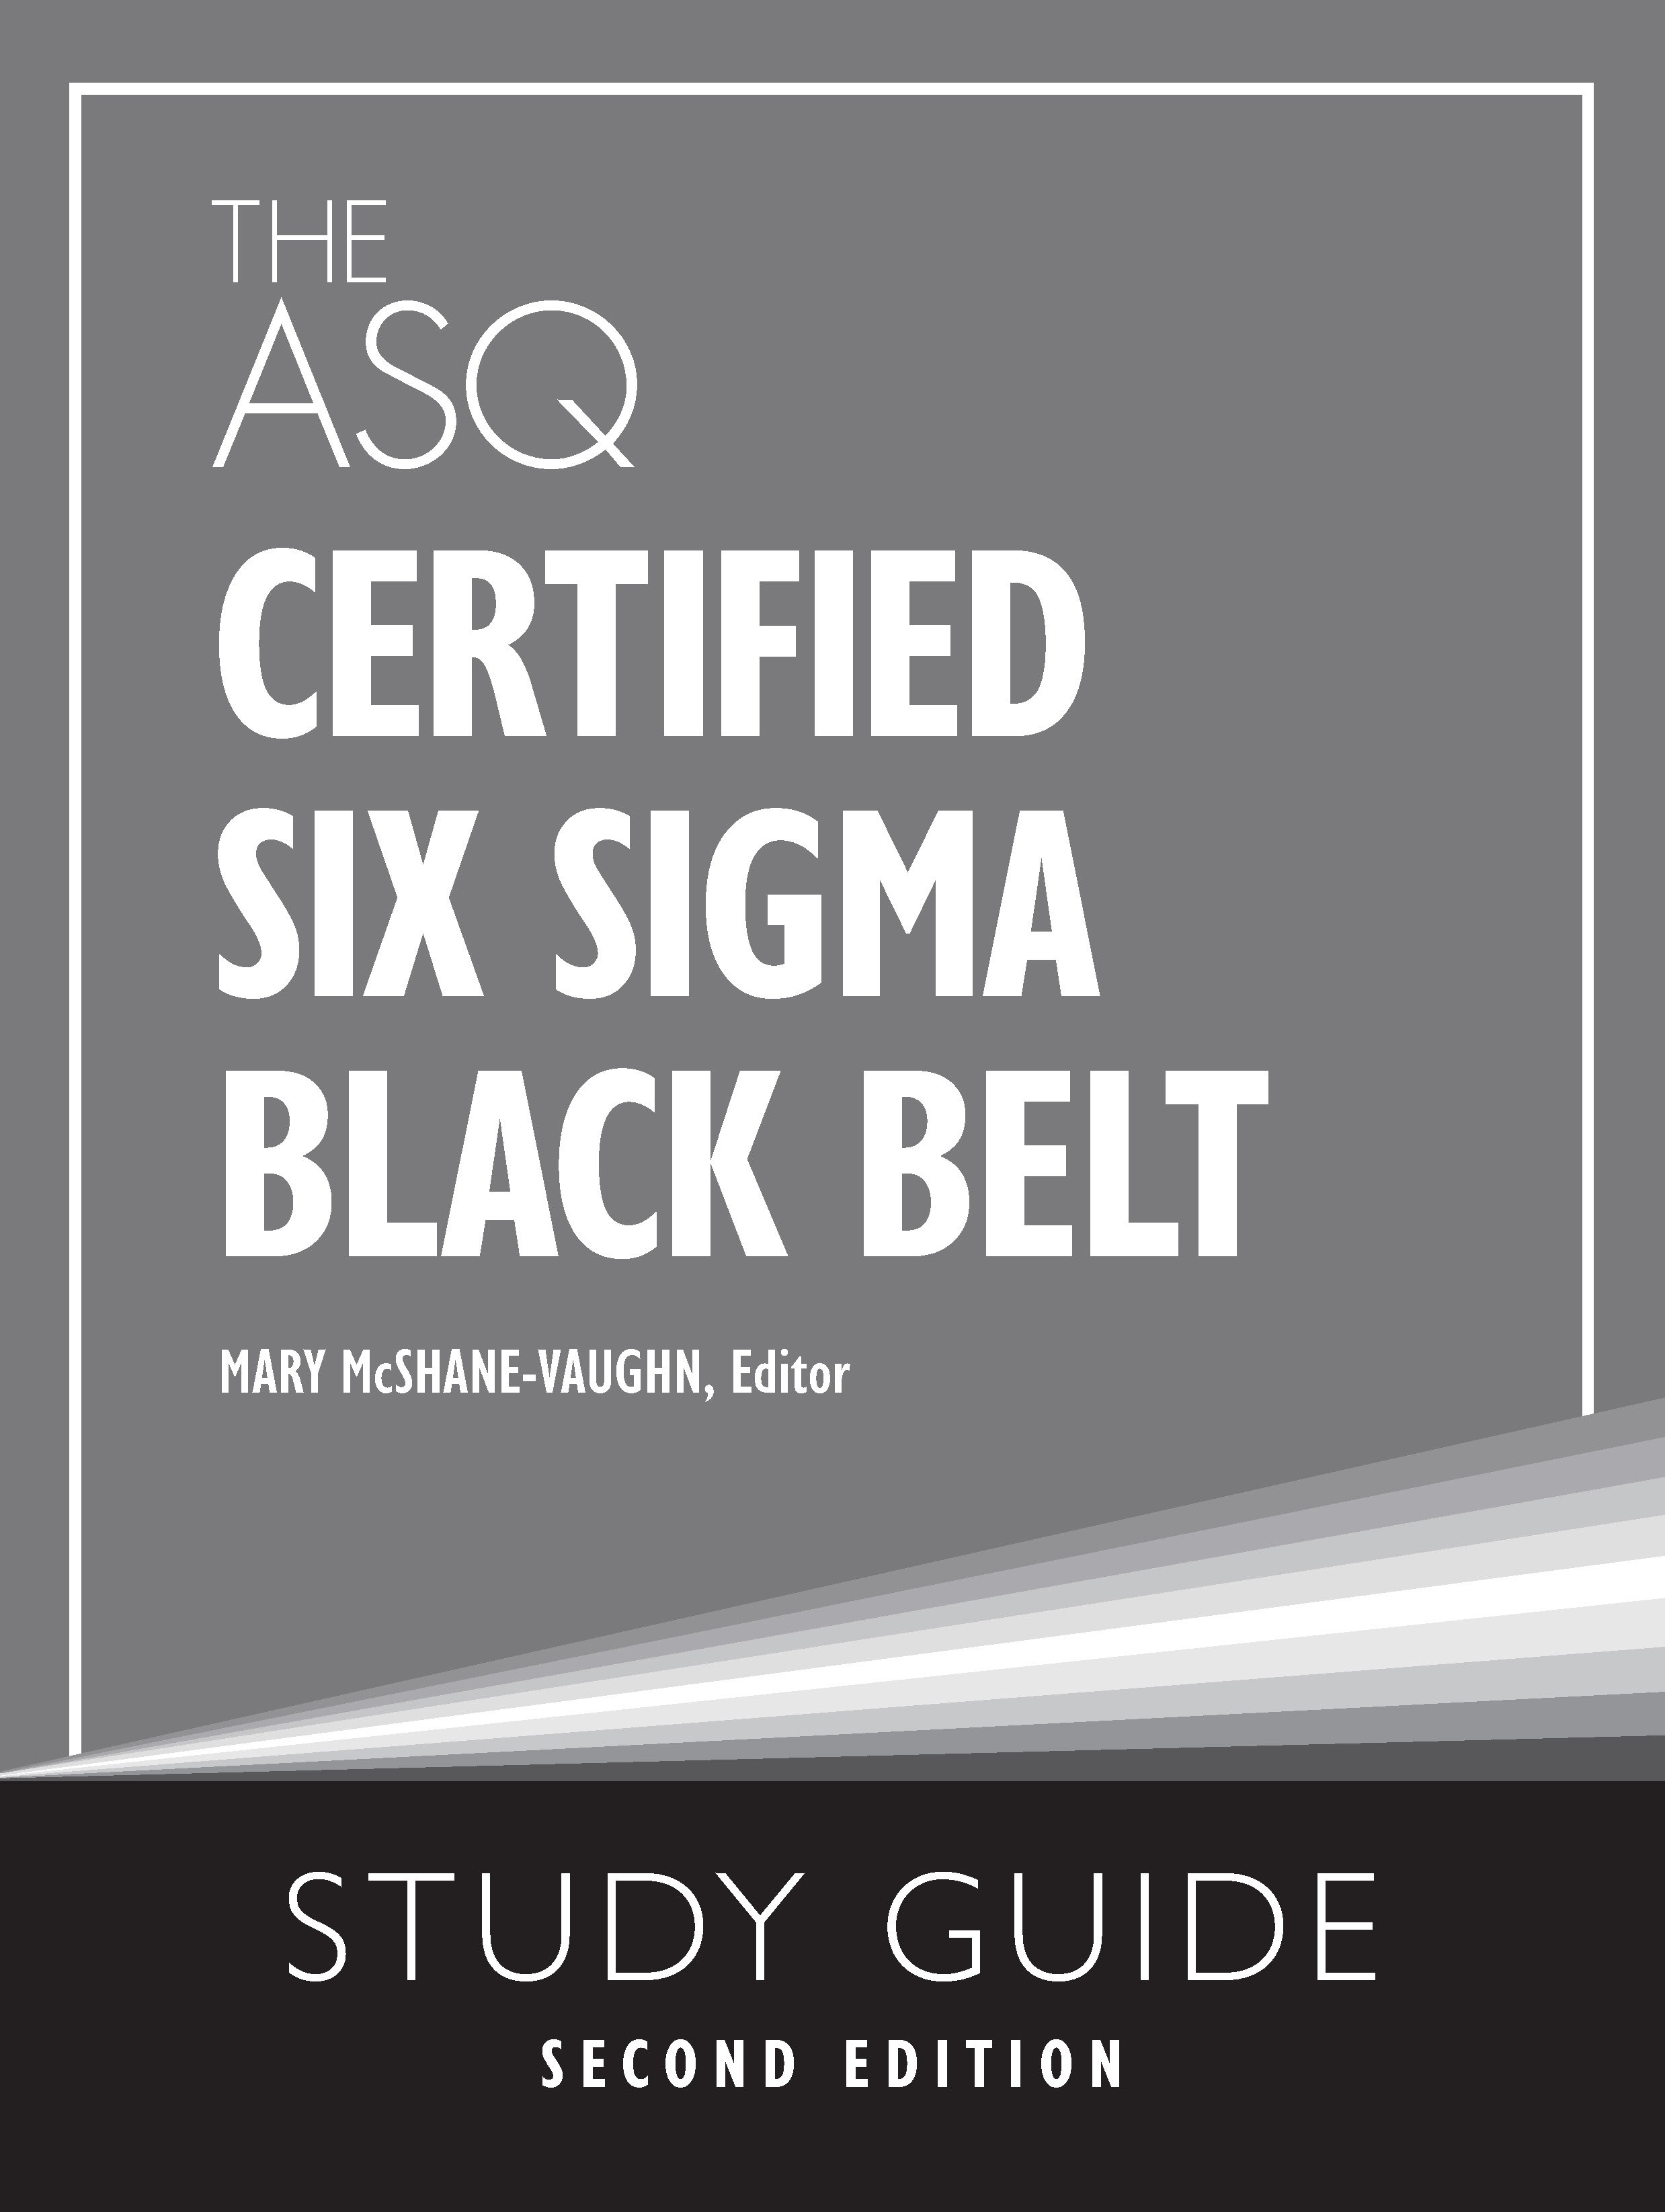 The ASQ Certified Six Sigma Black Belt Study Guide, Second Edition